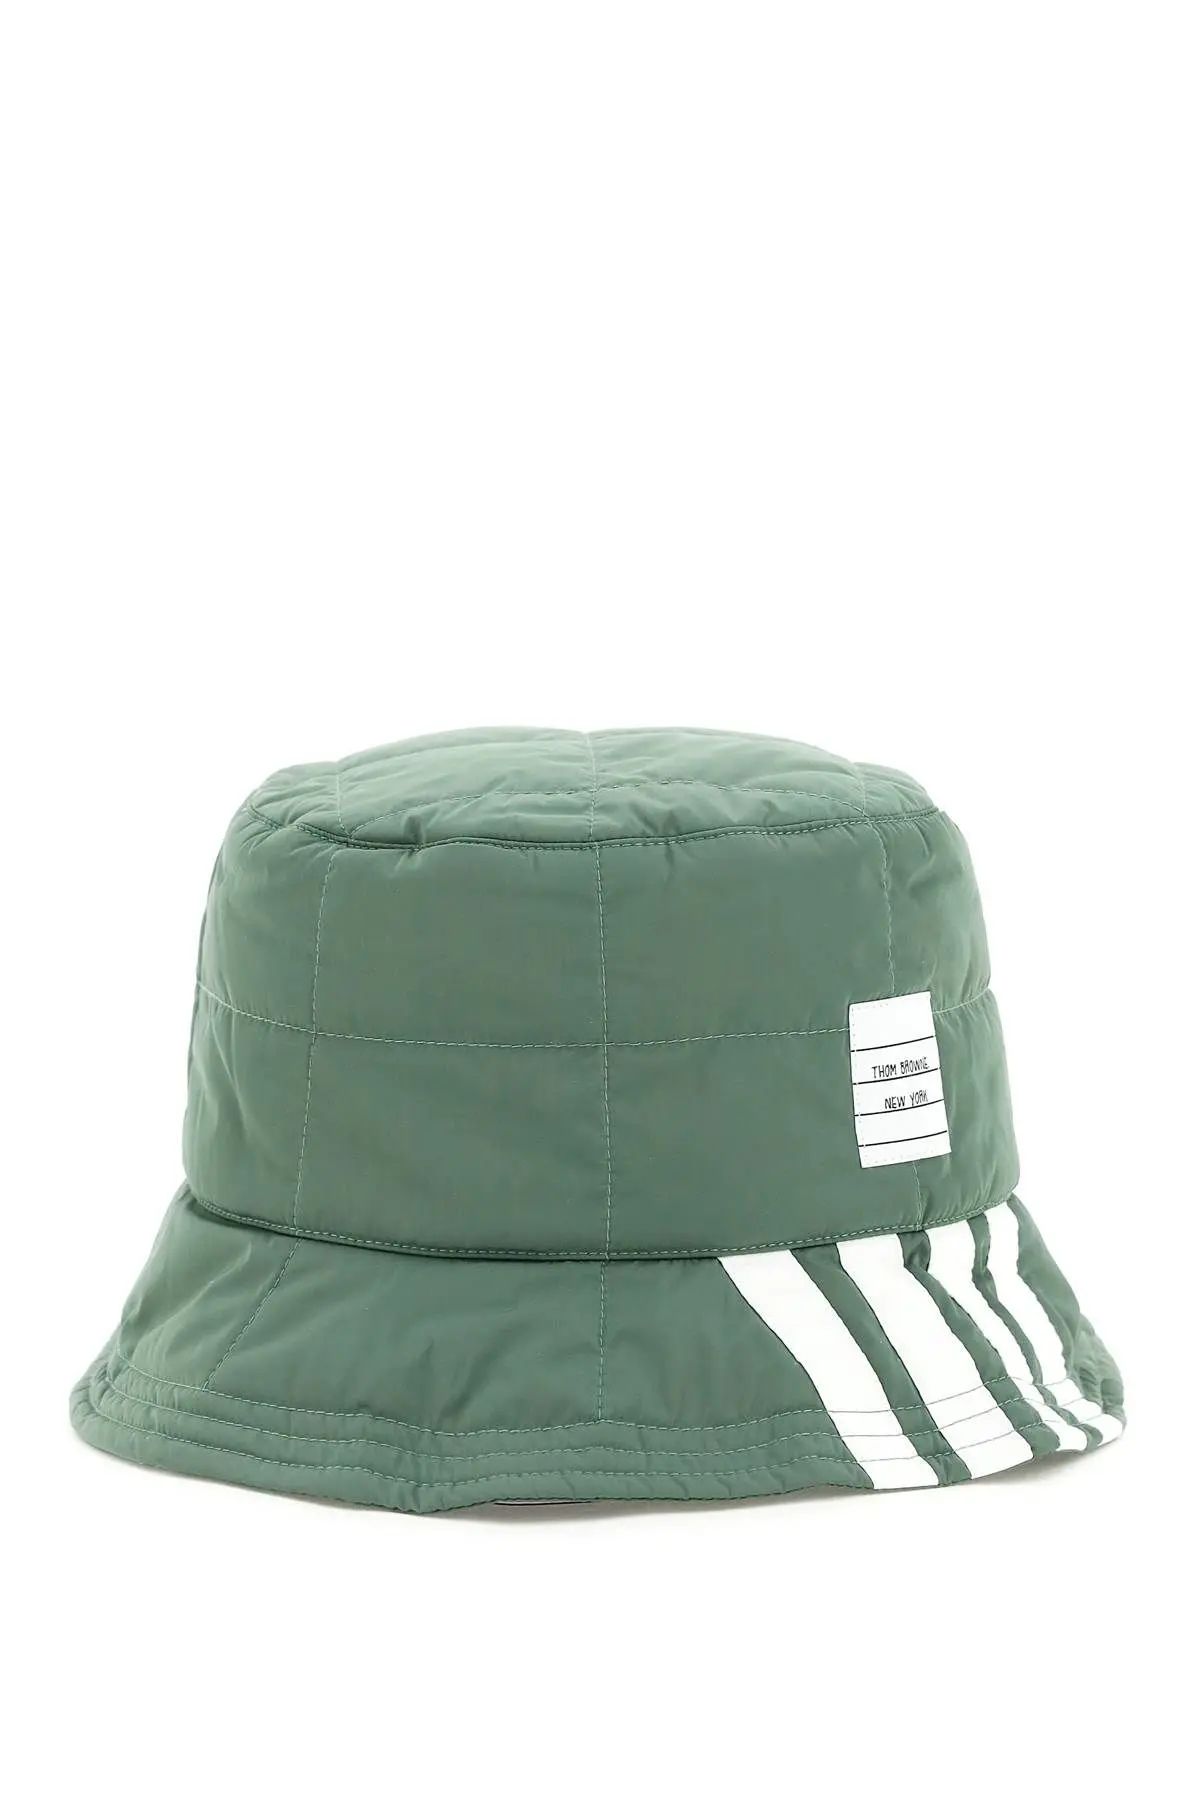 Pre-owned Thom Browne Padded Bucket Hat In Green